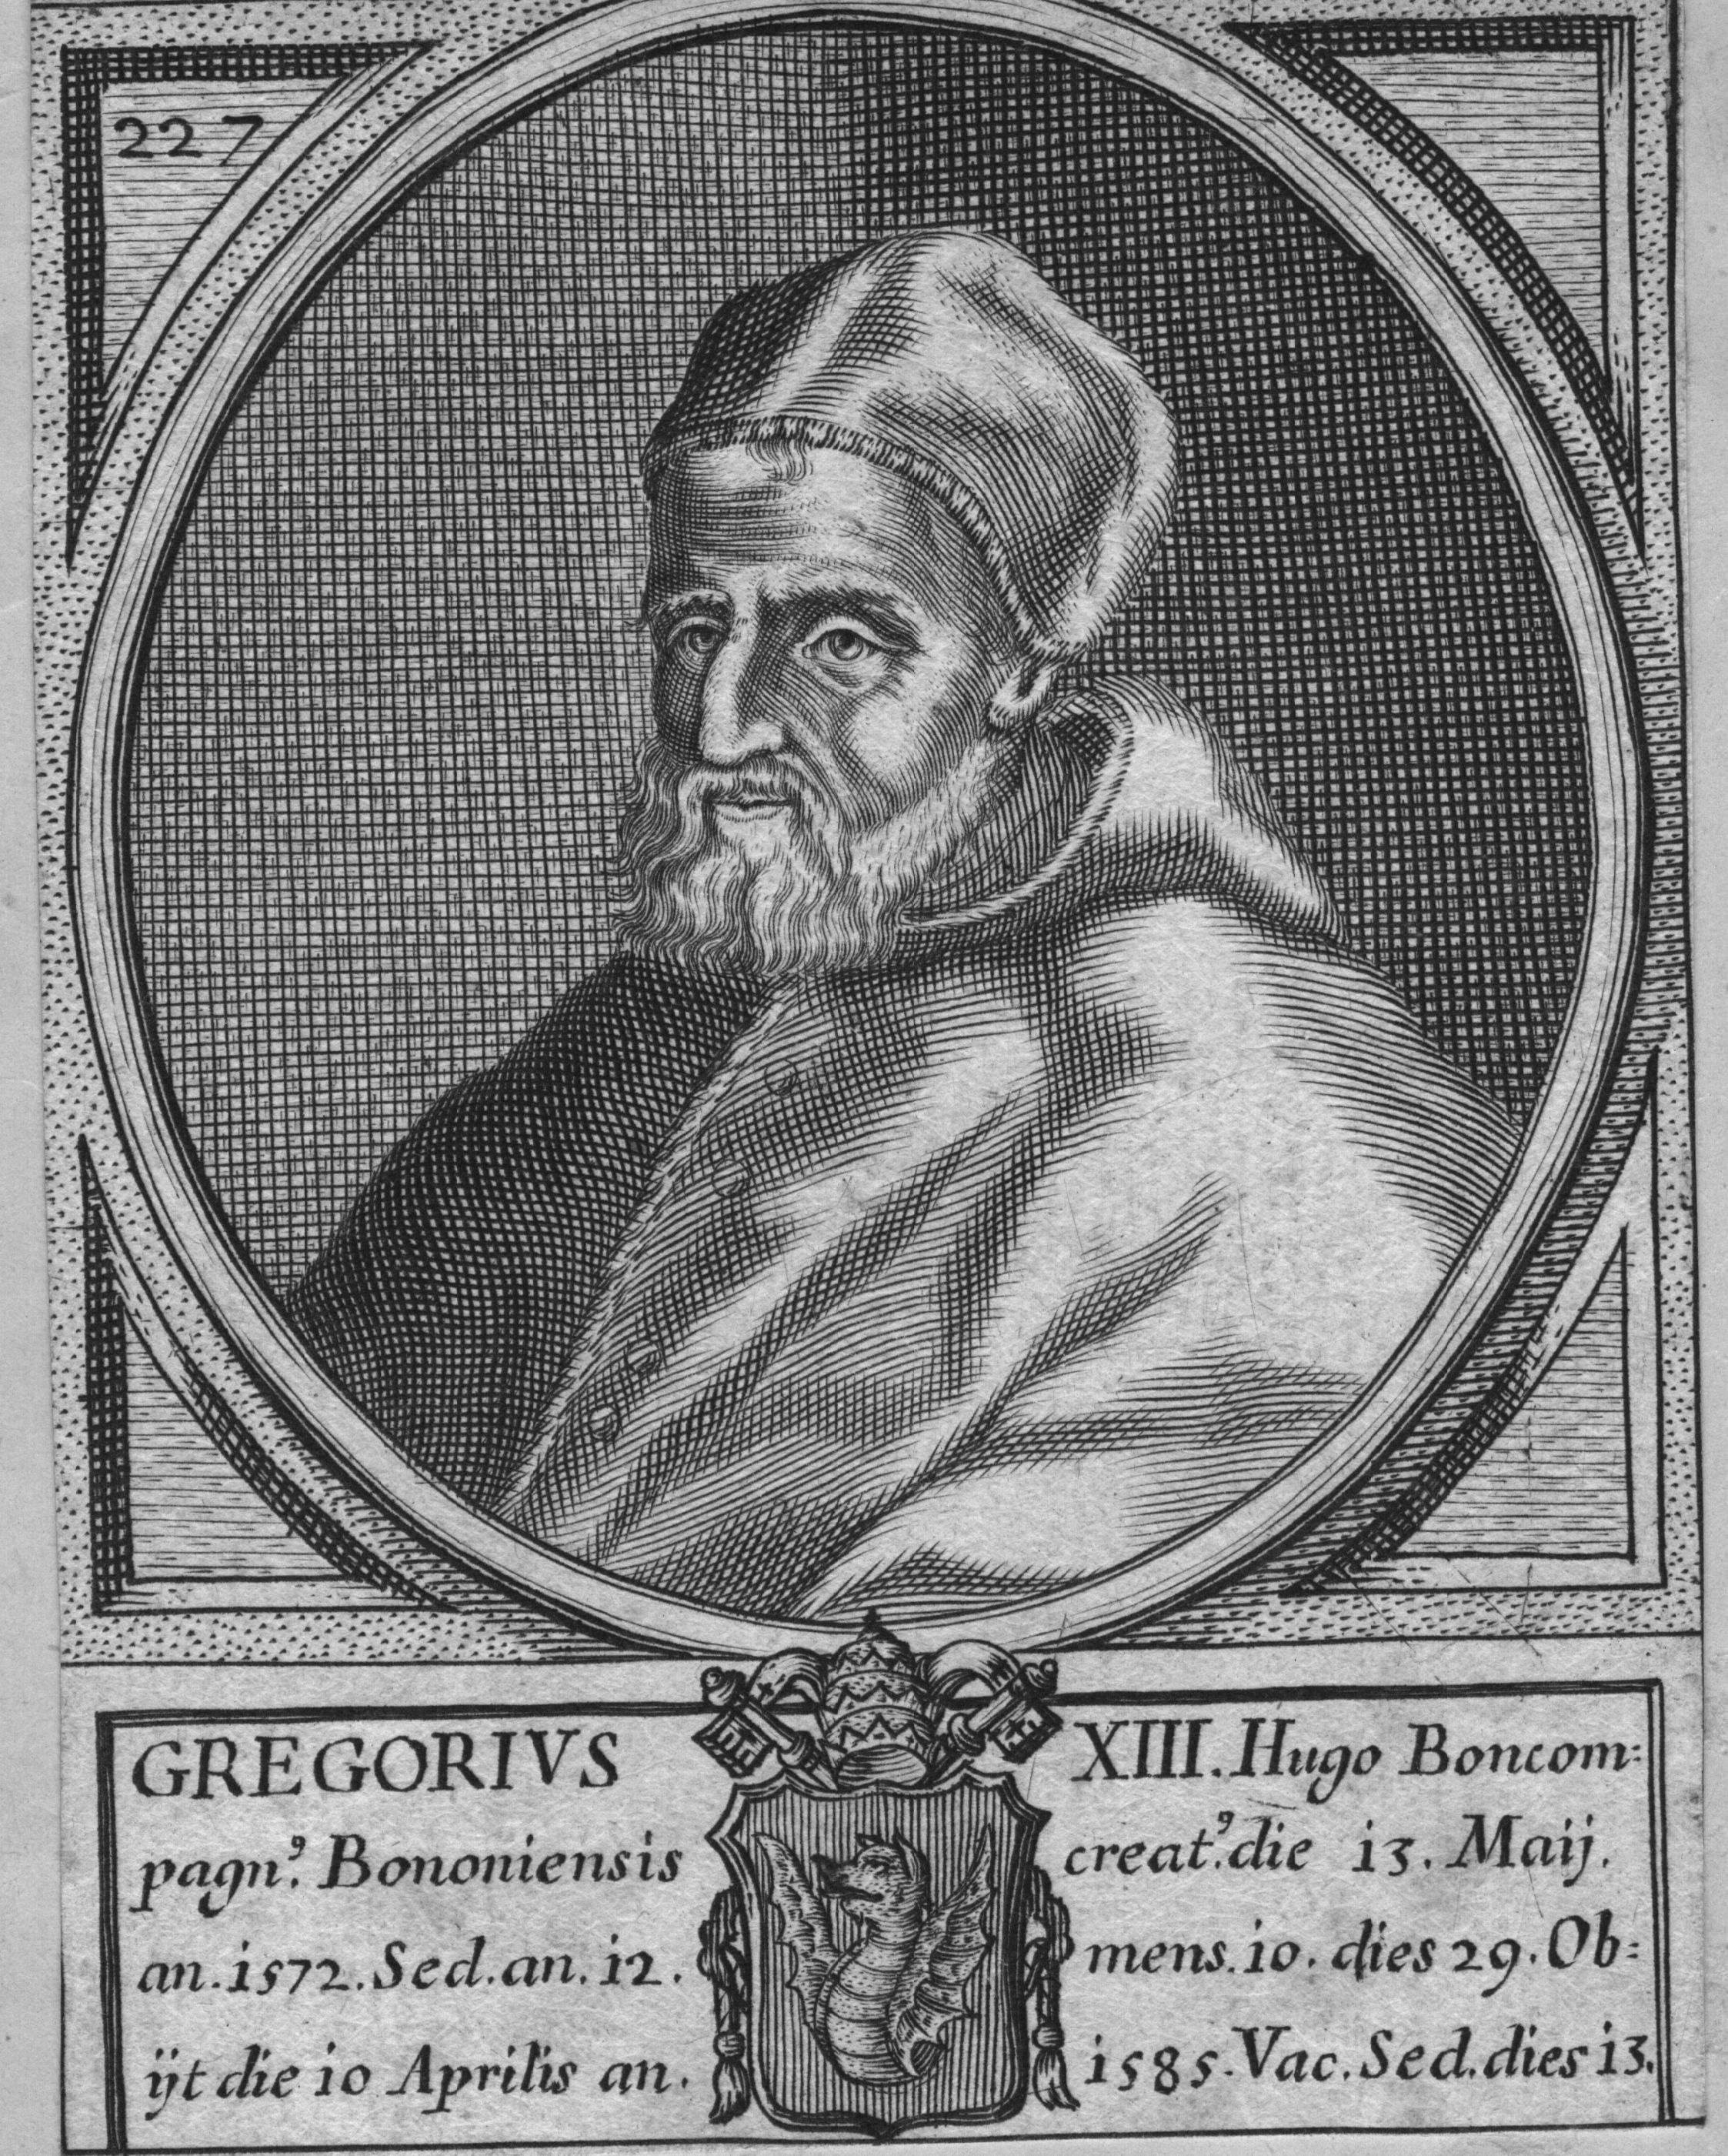 Circa 1583, Pope Gregory XIII who introduced the reformed Gregorian calendar. (Photo by Hulton Archive/Getty Images)